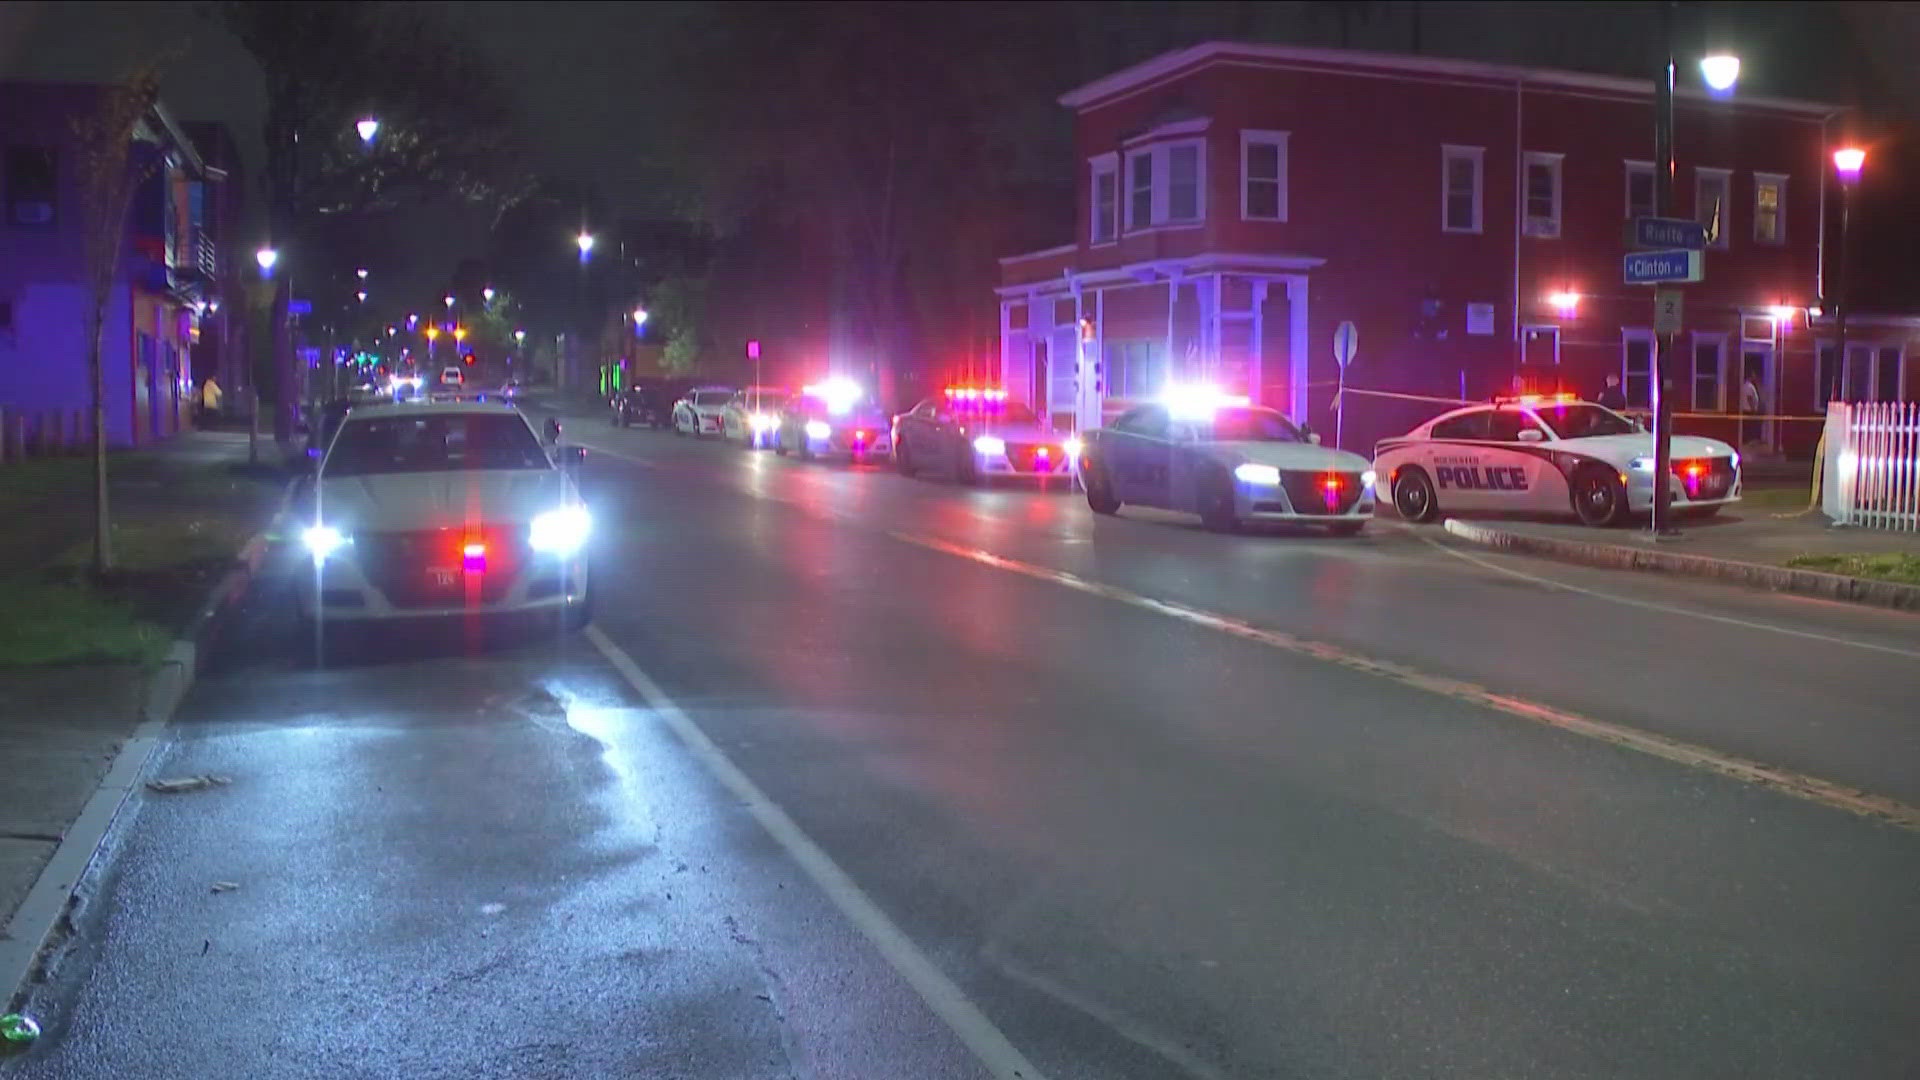 Rochester Police said they have not yet arrested a suspect.